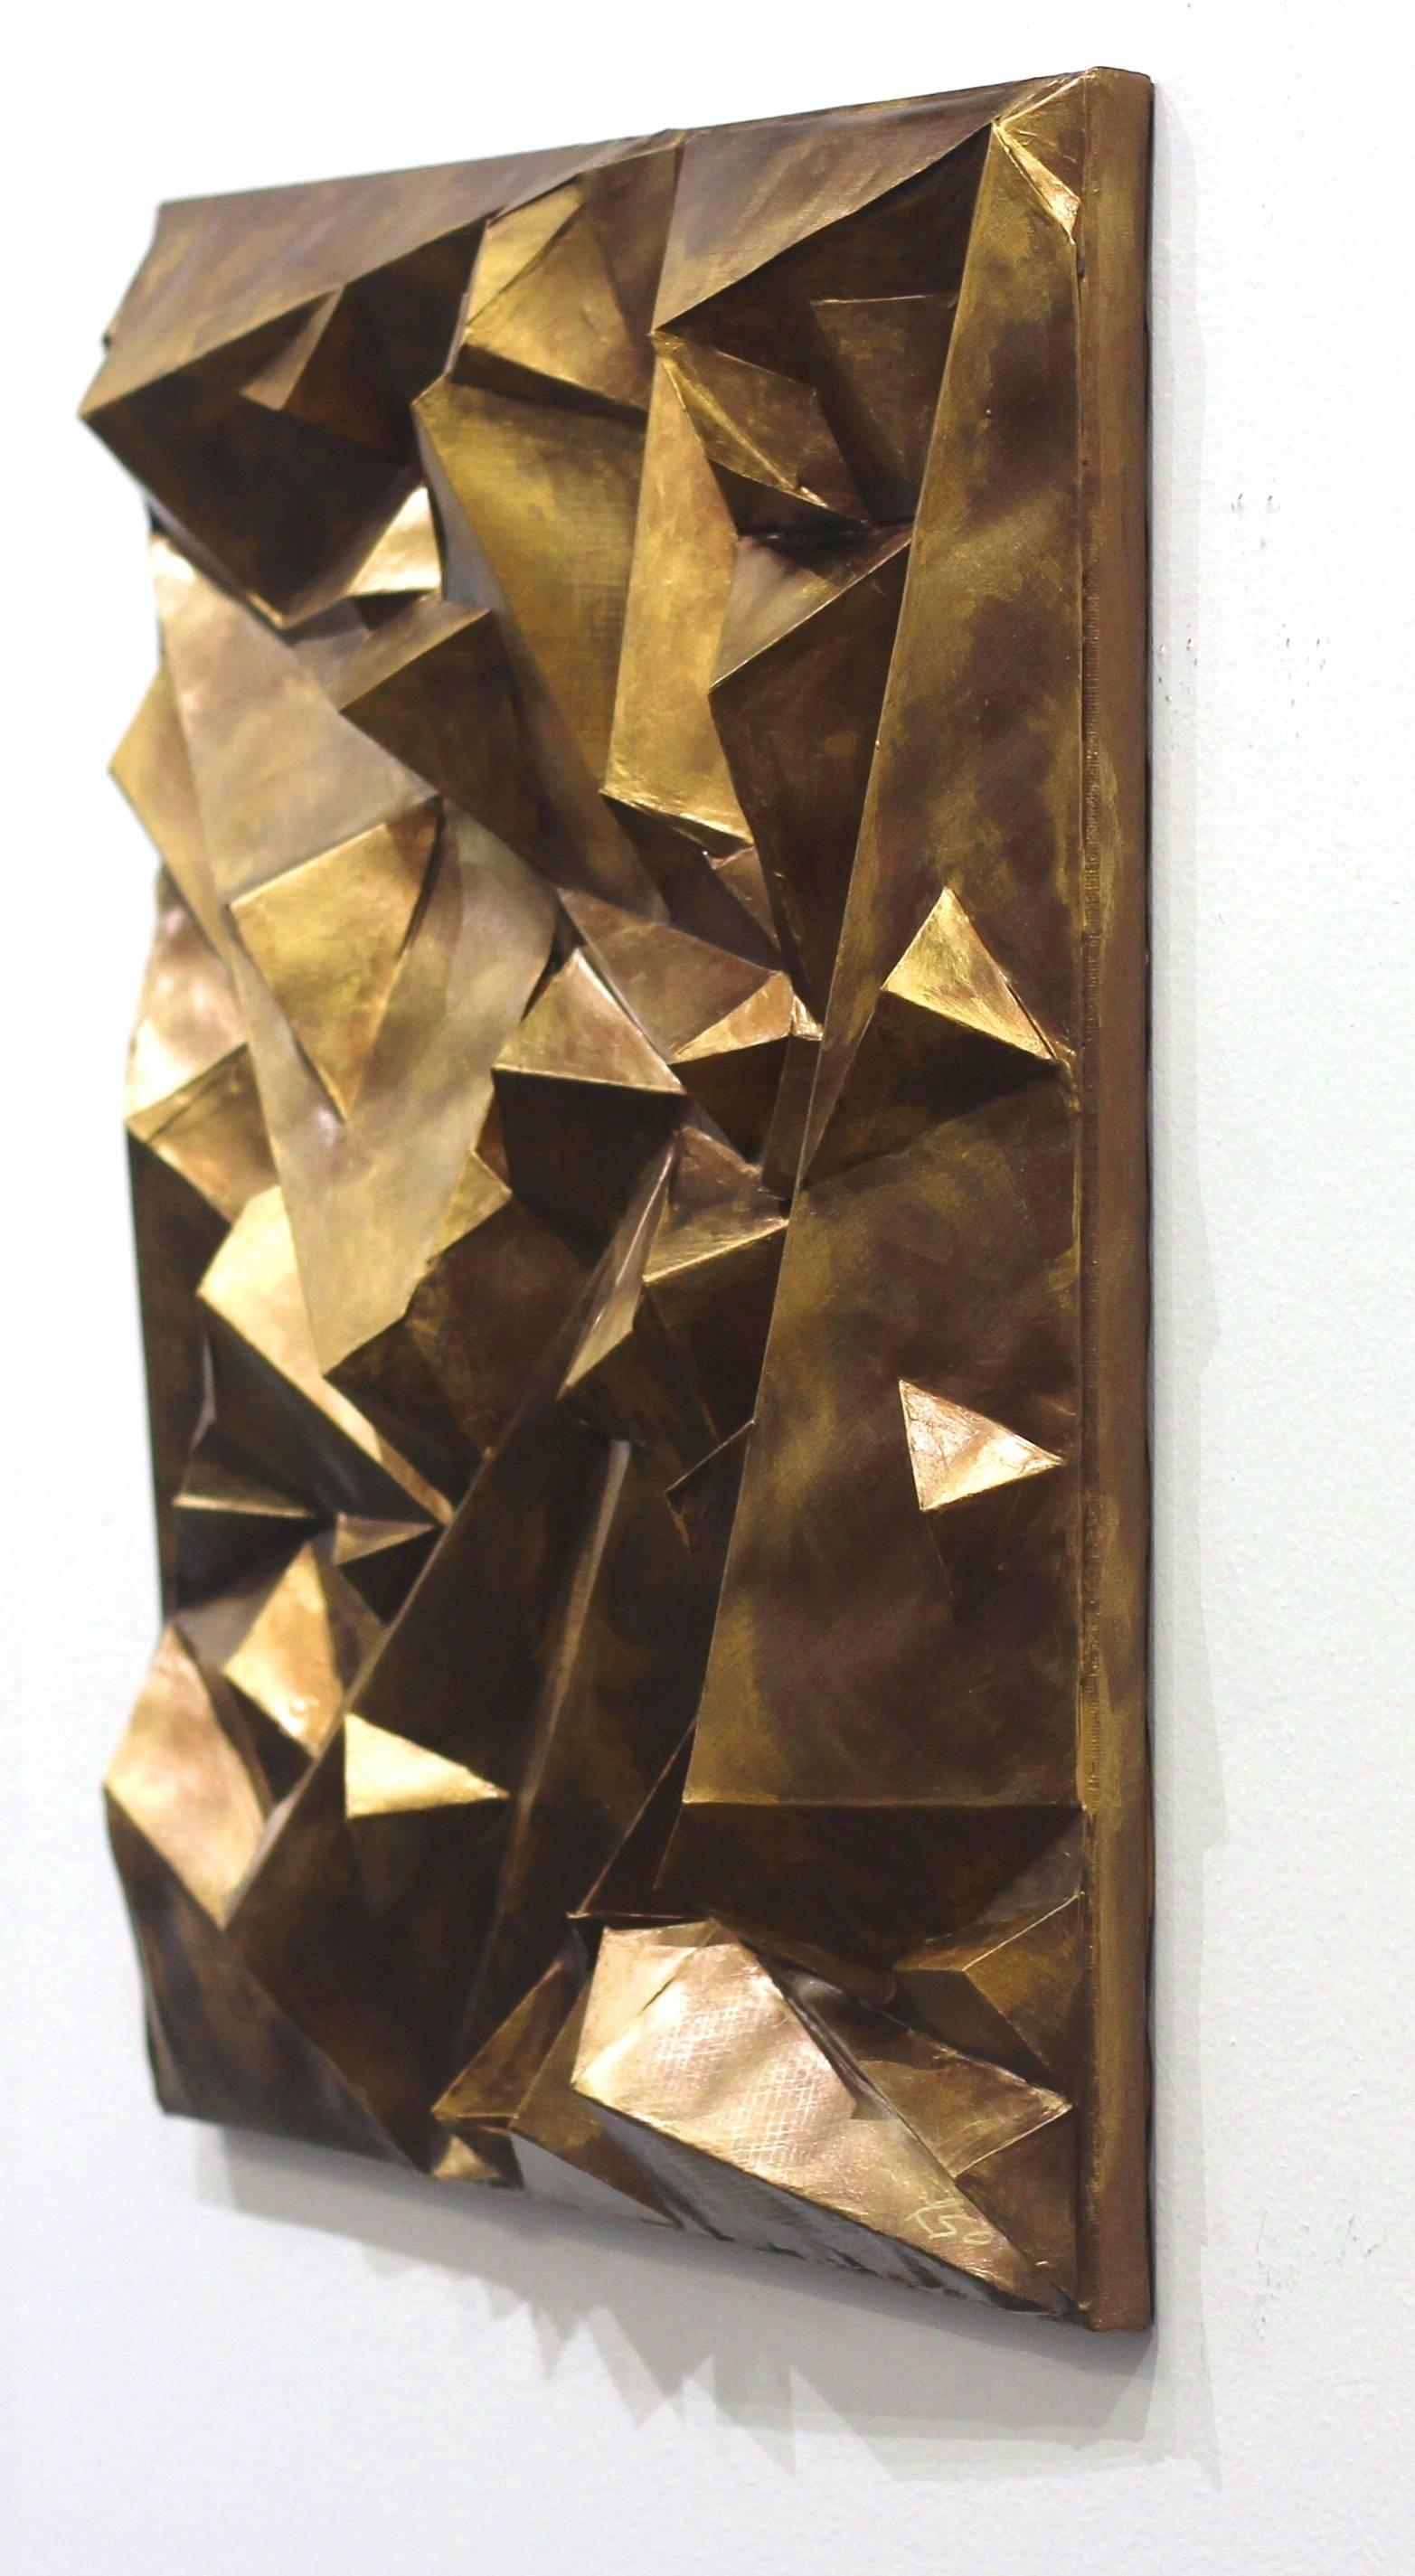 Ryan Shane Owen's three-dimensional hanging abstract sculptural works are done in a relief style with mixed mediums. Inspired by architecture, landscape, and geological formations, these compositions are evocative of macro and microcosms. With a